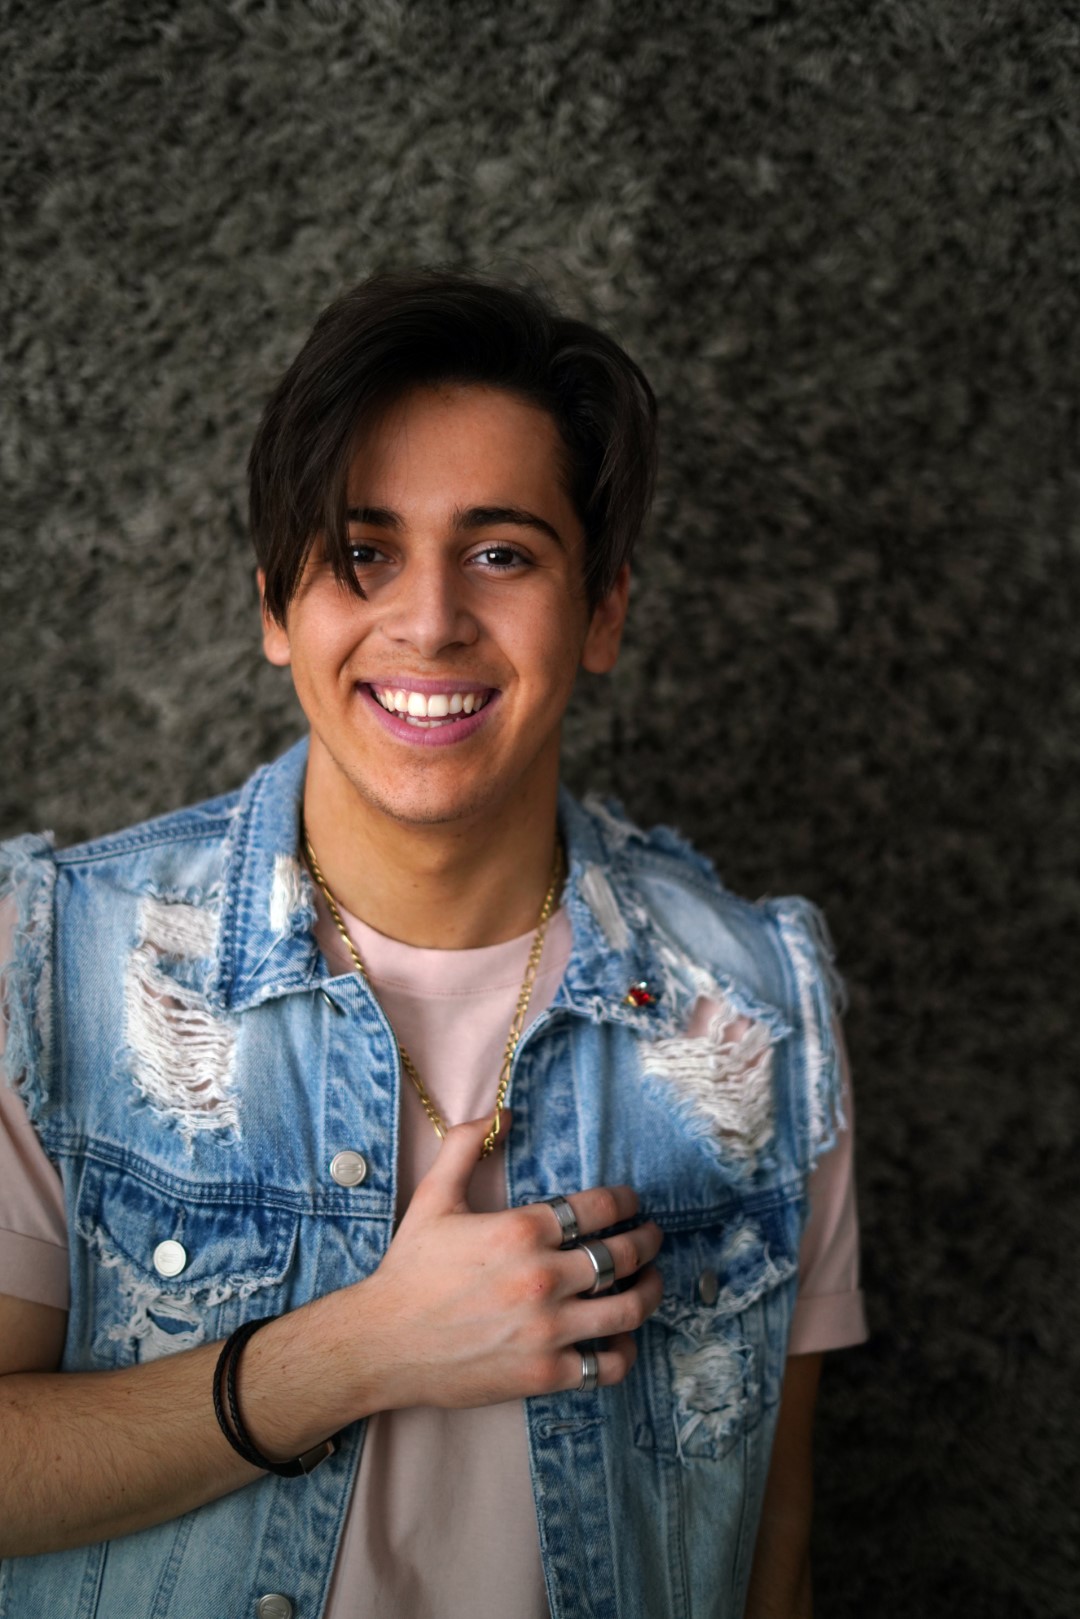 Eurovision Australia Decides 2019: There’s no dust on AYDAN